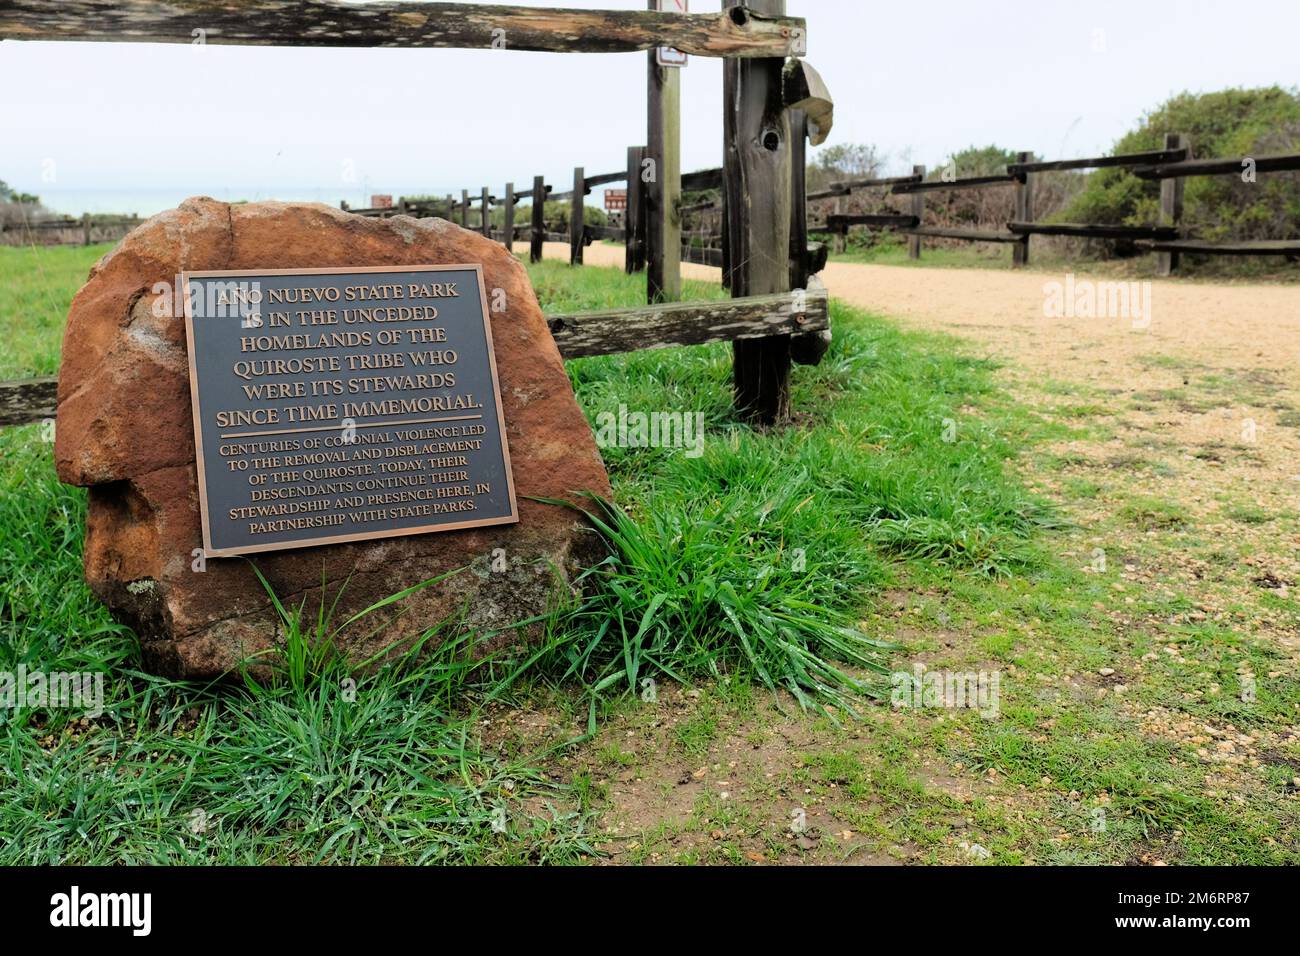 Indigenous land acknowledgment at Año Nuevo State Park in San Mateo County, California; recognition of colonial violence of the Quiroste people. Stock Photo